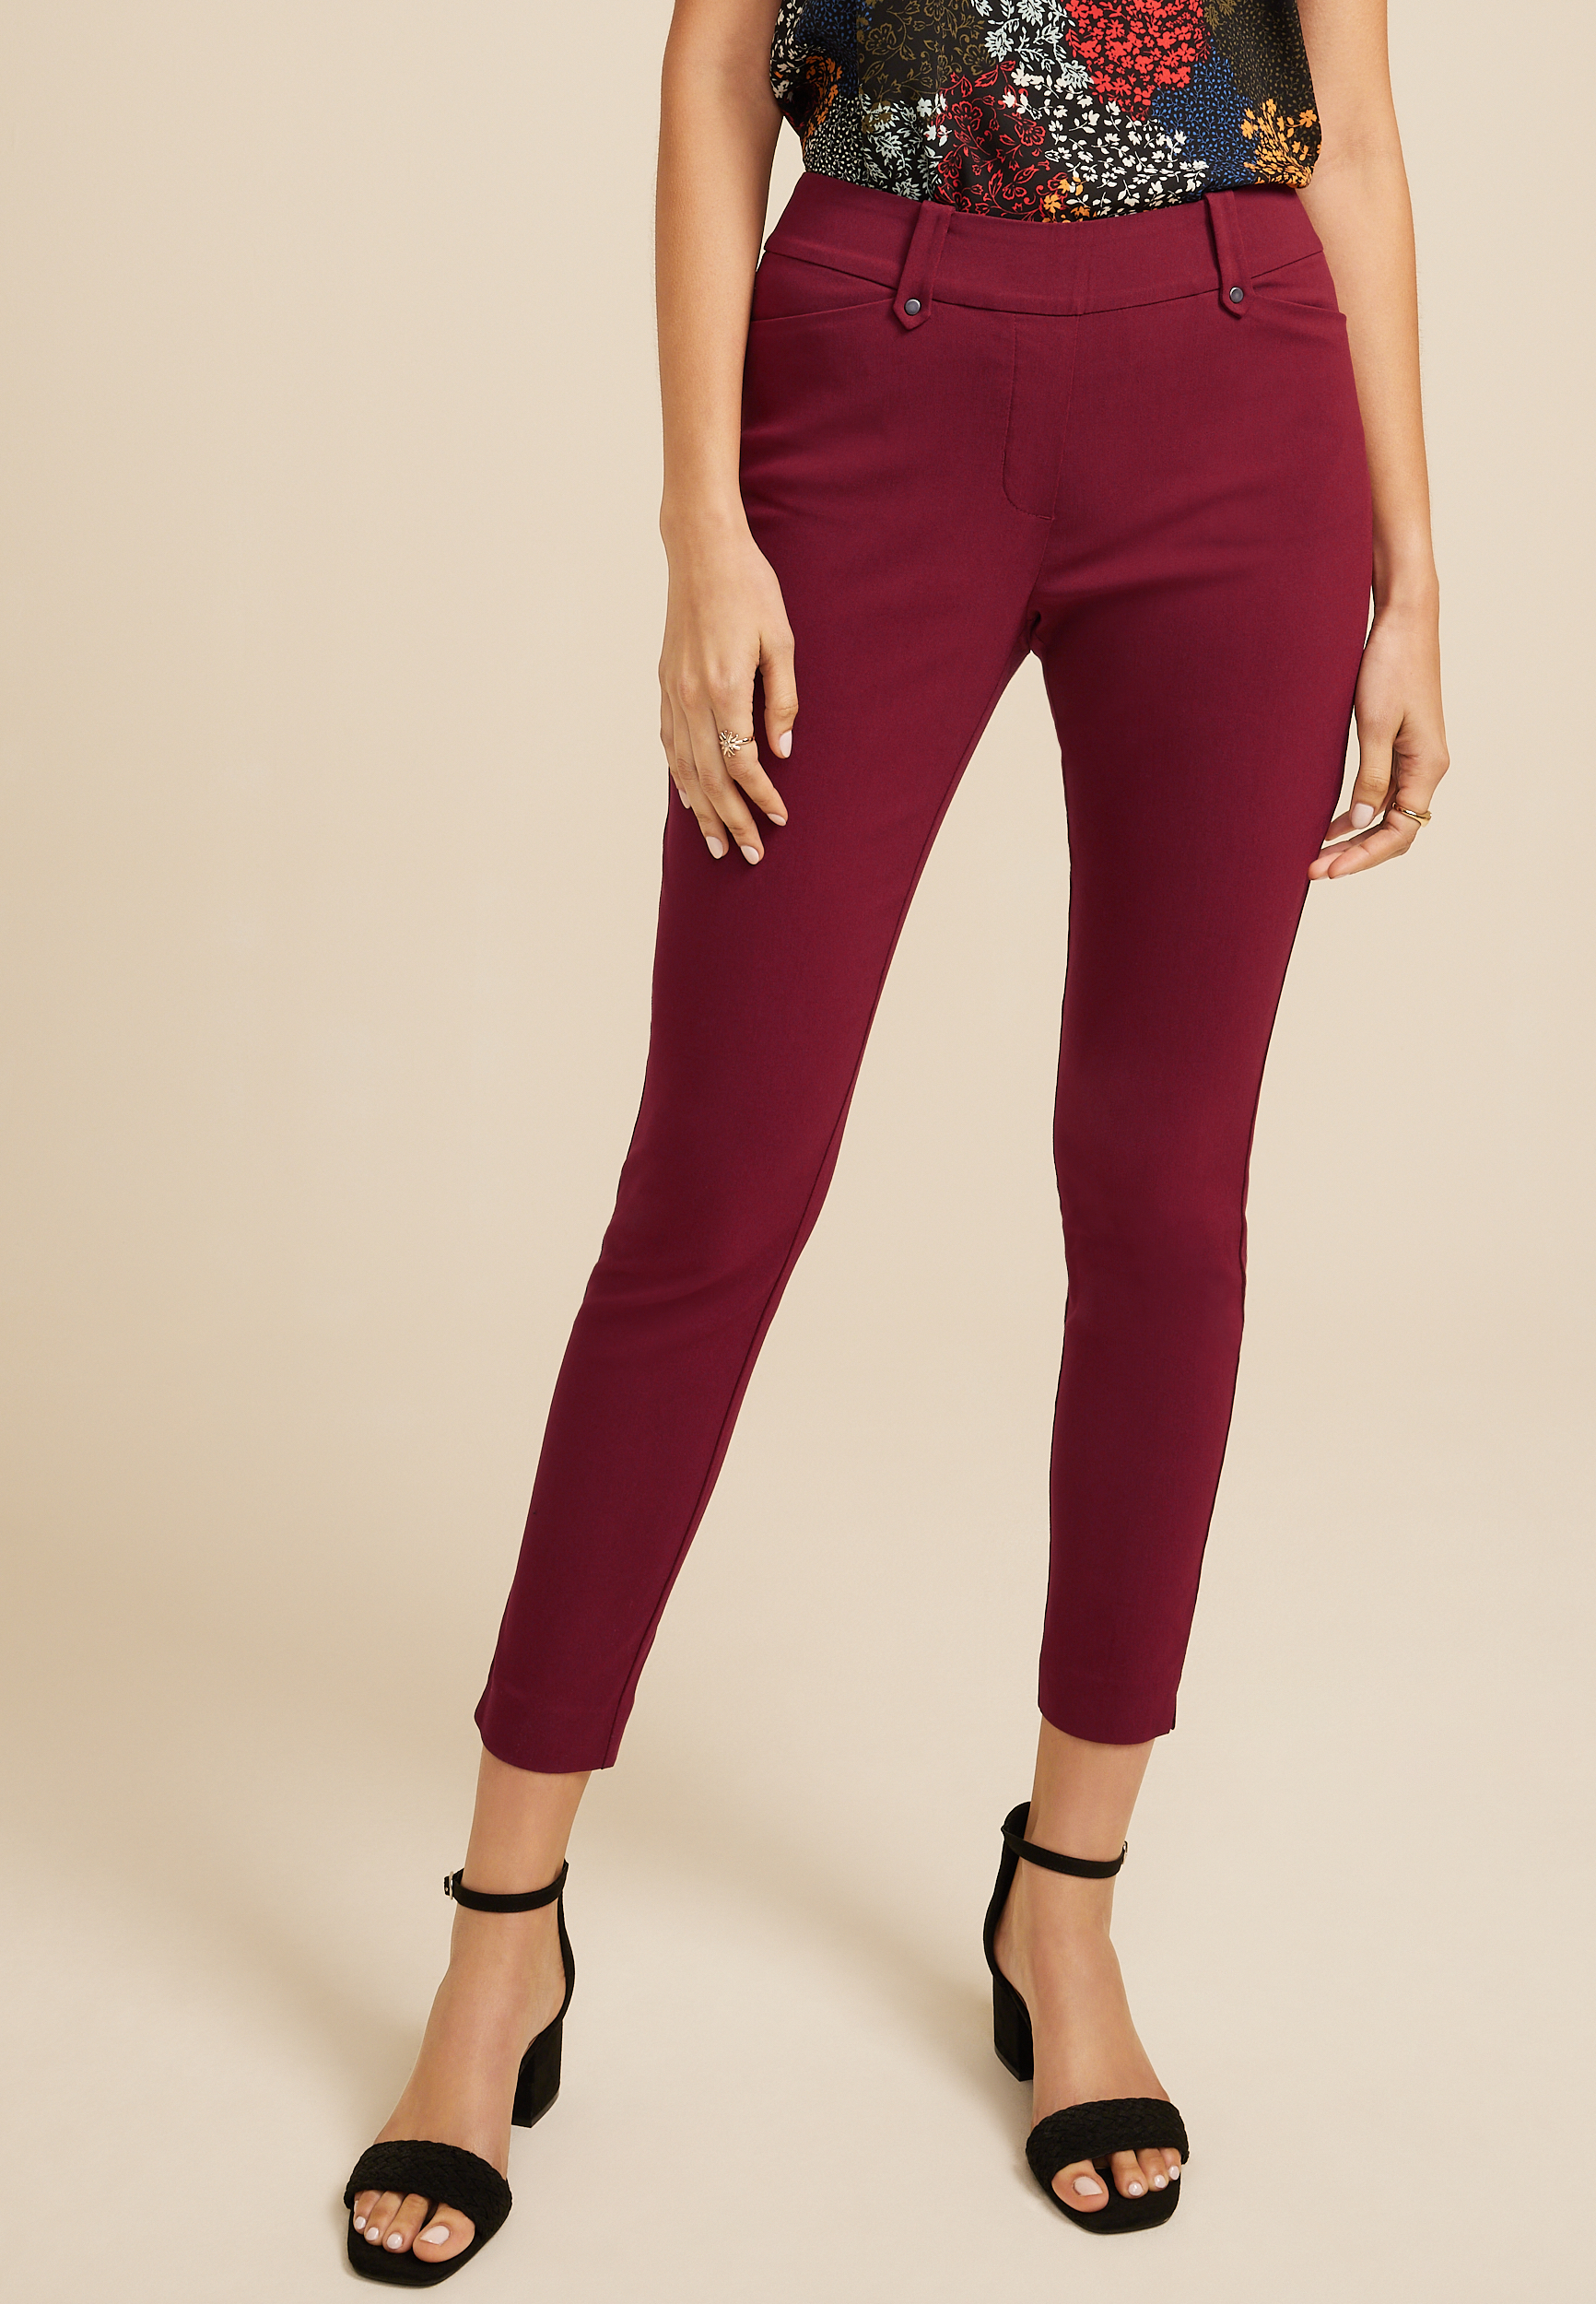 Preview Skinny Ankle Bengaline Pants